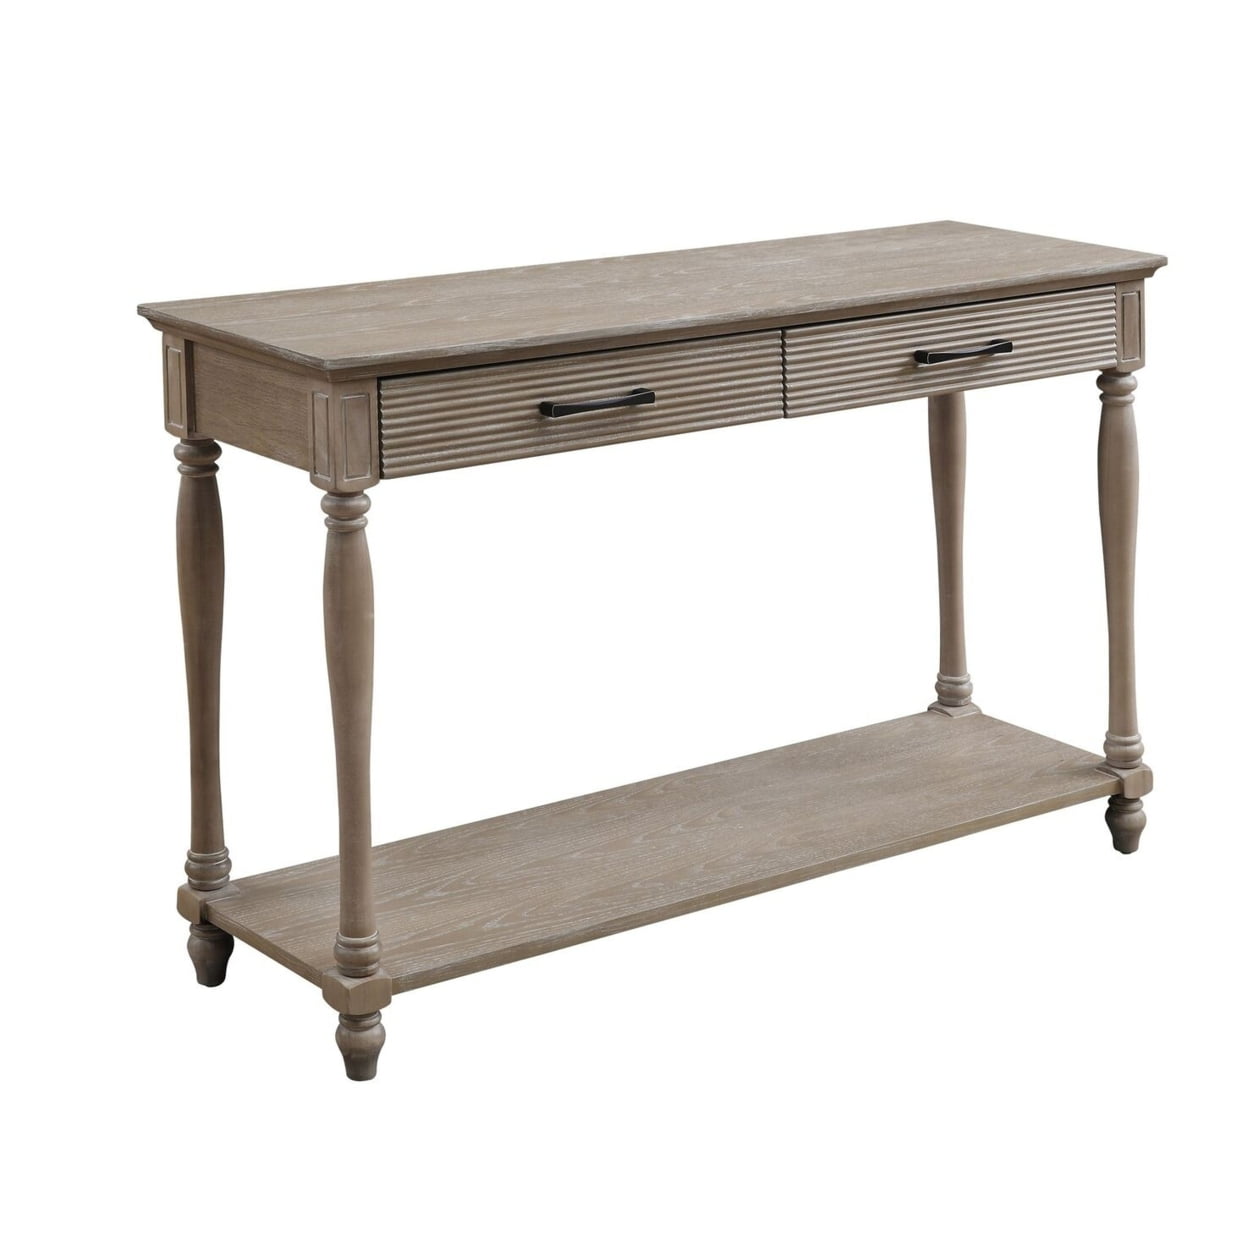 Picture of Benjara BM211093 Wooden Sofa Table with 2 Drawers & Molded Design - Antique White - 30 x 16 x 48 in.